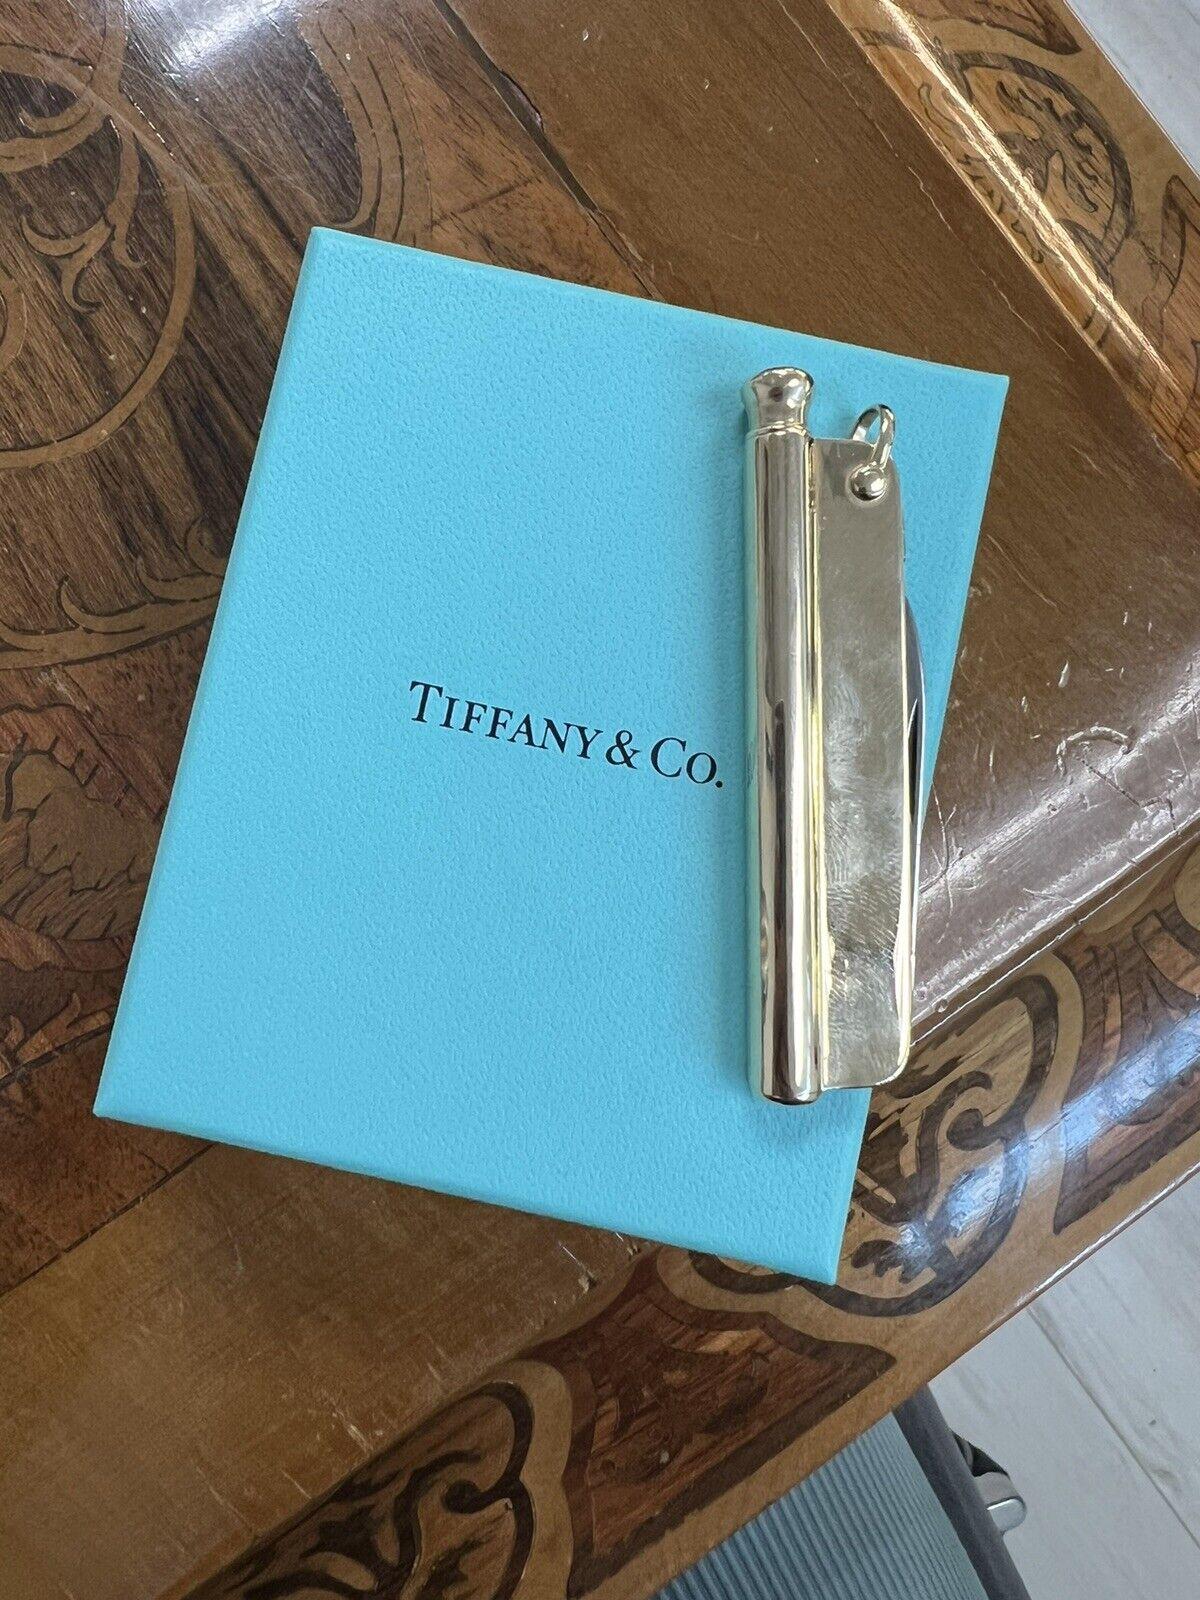 Tiffany & Co. Antique 14k Yellow Gold Pocket Knife / Pencil Pendant Circa 1900s w/Box & Pouch

Here is your chance to purchase a beautiful and highly collectible designer pendant.  Truly a great piece at a great price! 

Weight: 31.9